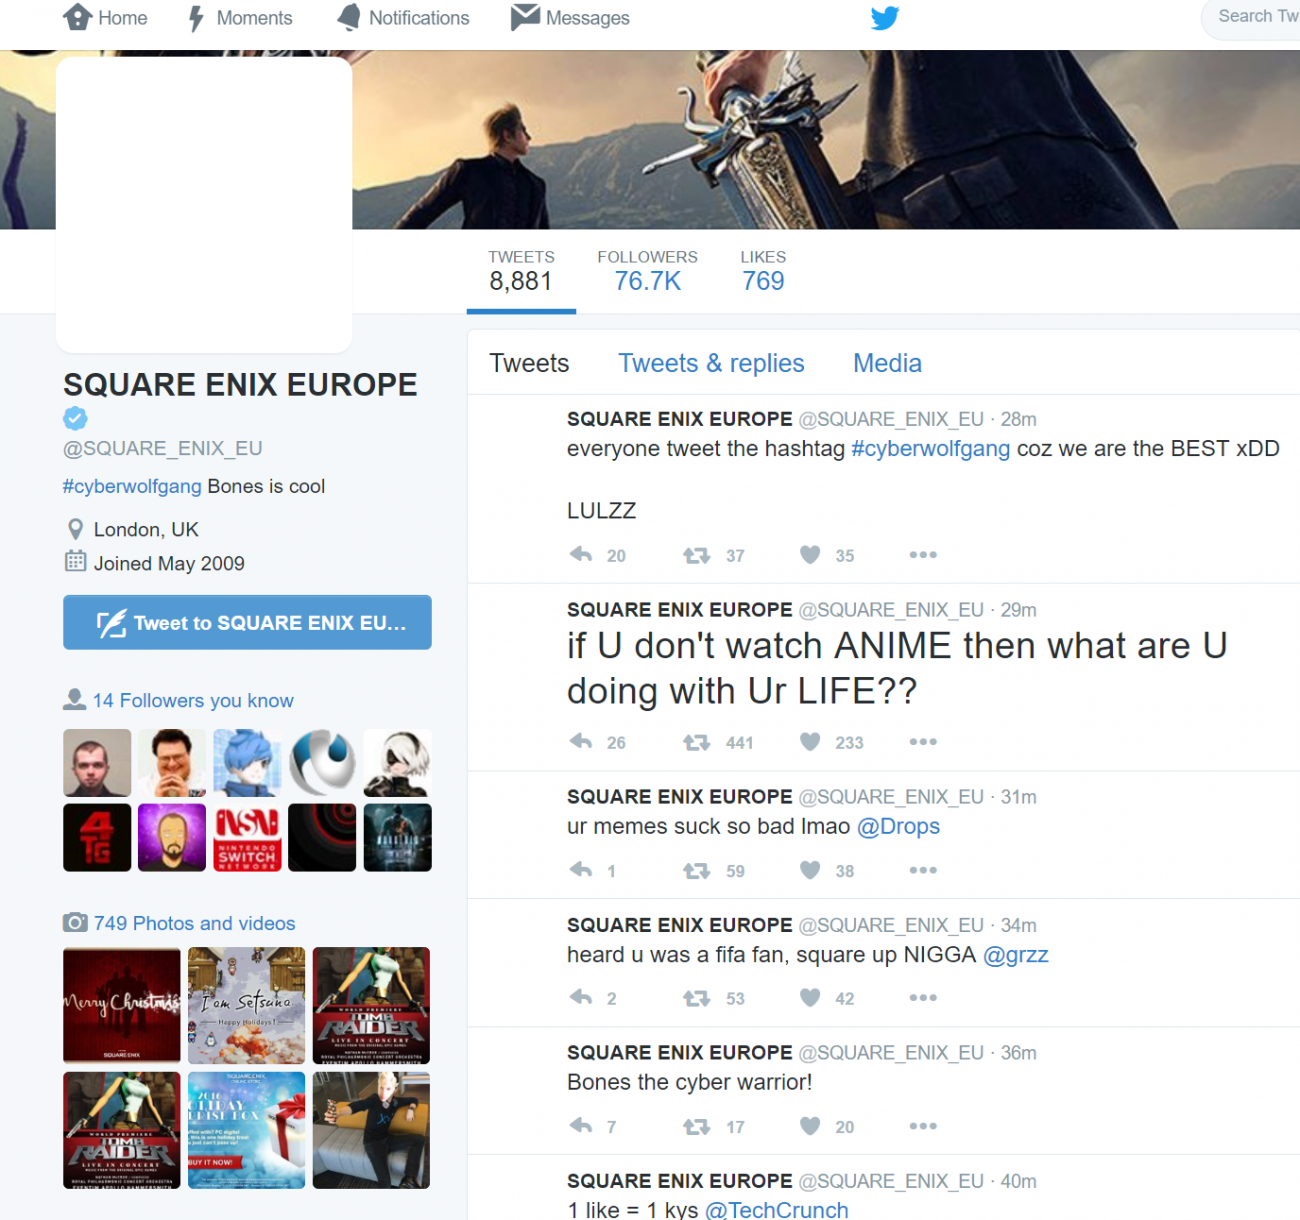 Square Enix recovers Twitter account following a hack earlier this